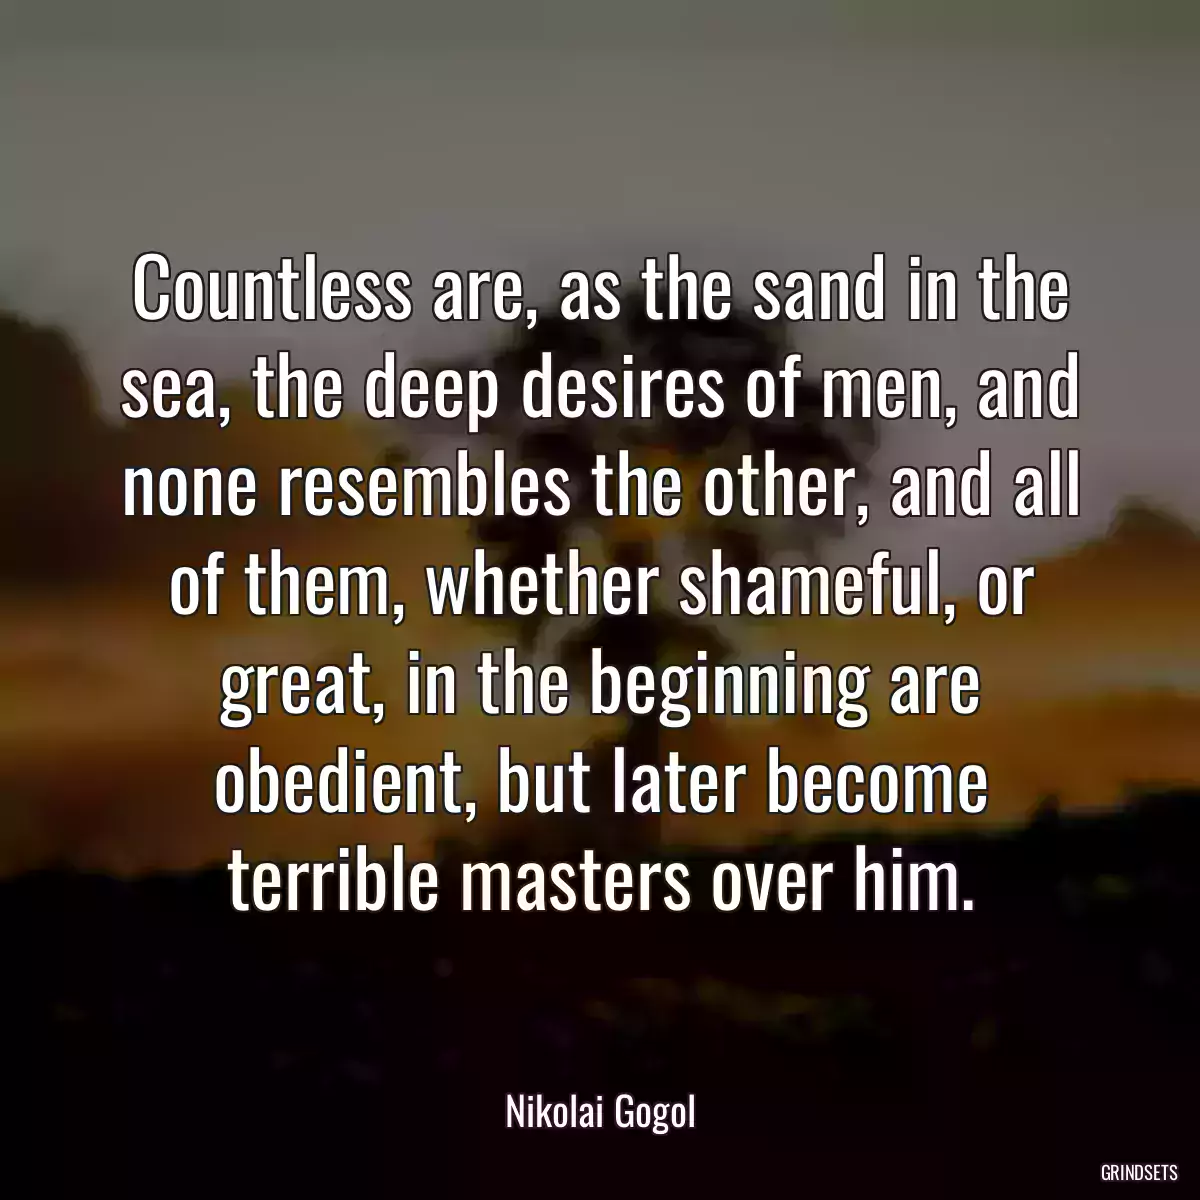 Countless are, as the sand in the sea, the deep desires of men, and none resembles the other, and all of them, whether shameful, or great, in the beginning are obedient, but later become terrible masters over him.